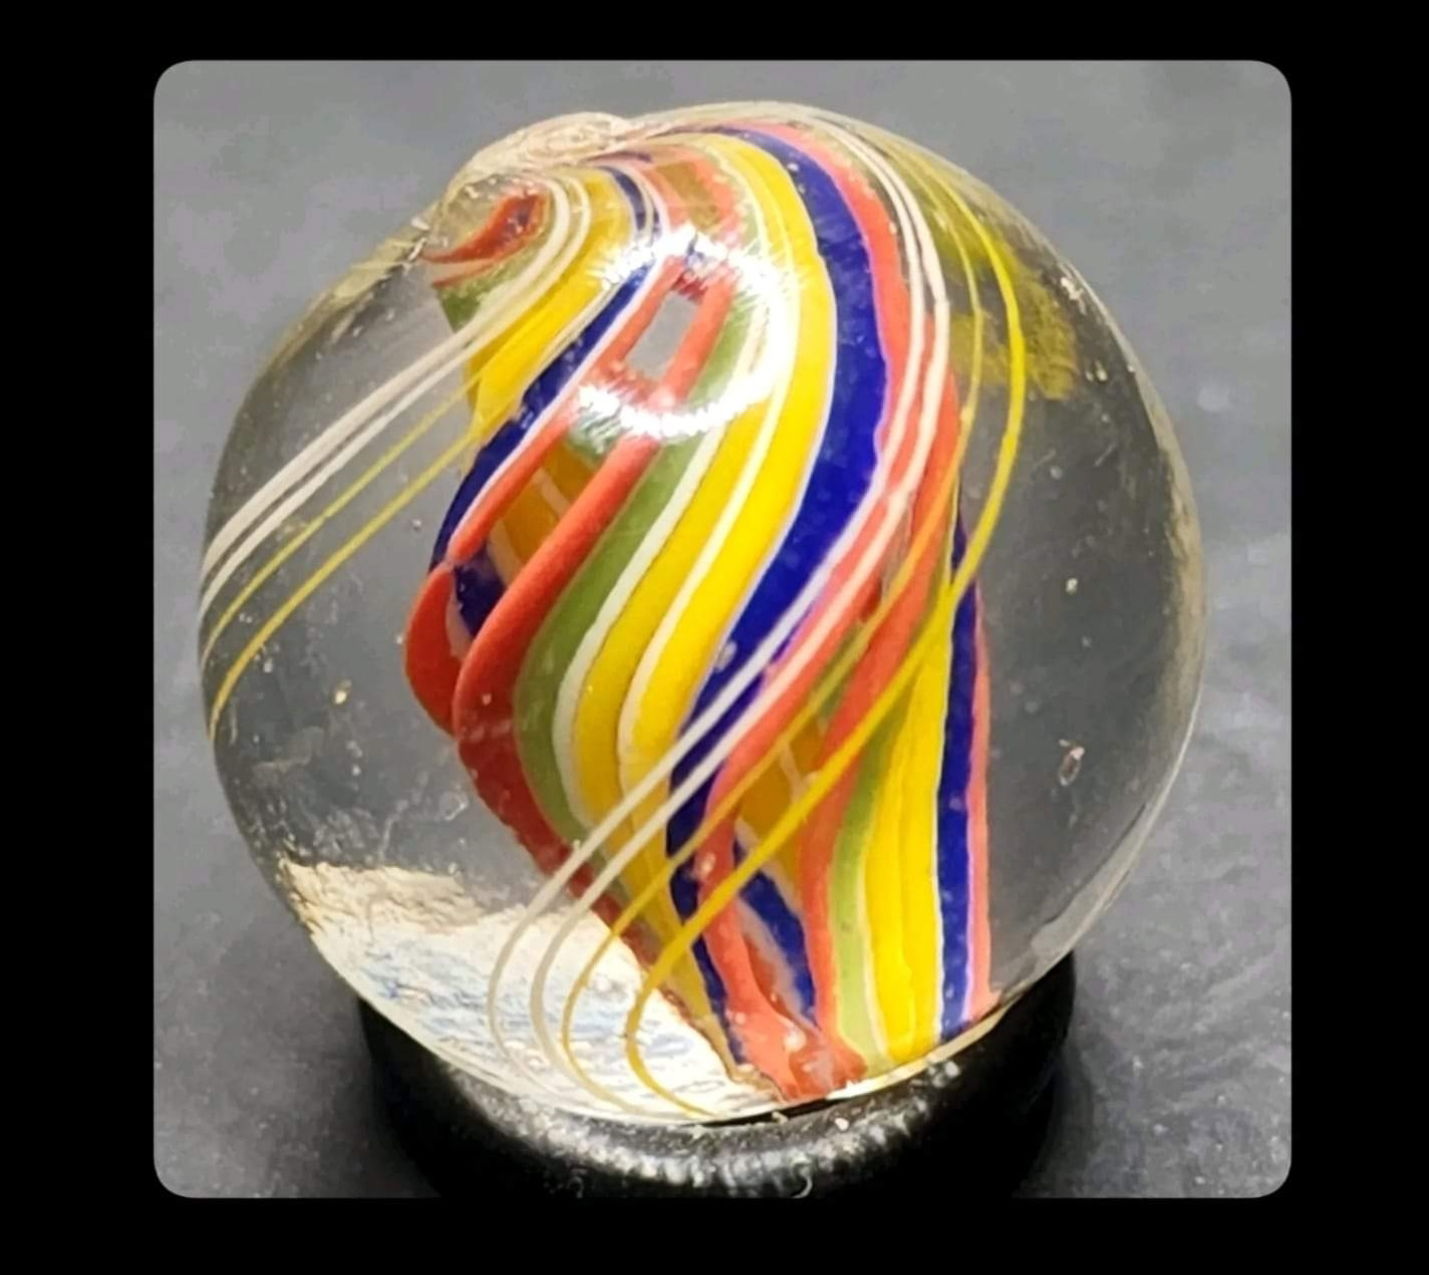 $25 19/32" Bright Divided Core Swirl, Earlier Well Finished Pontils MINT